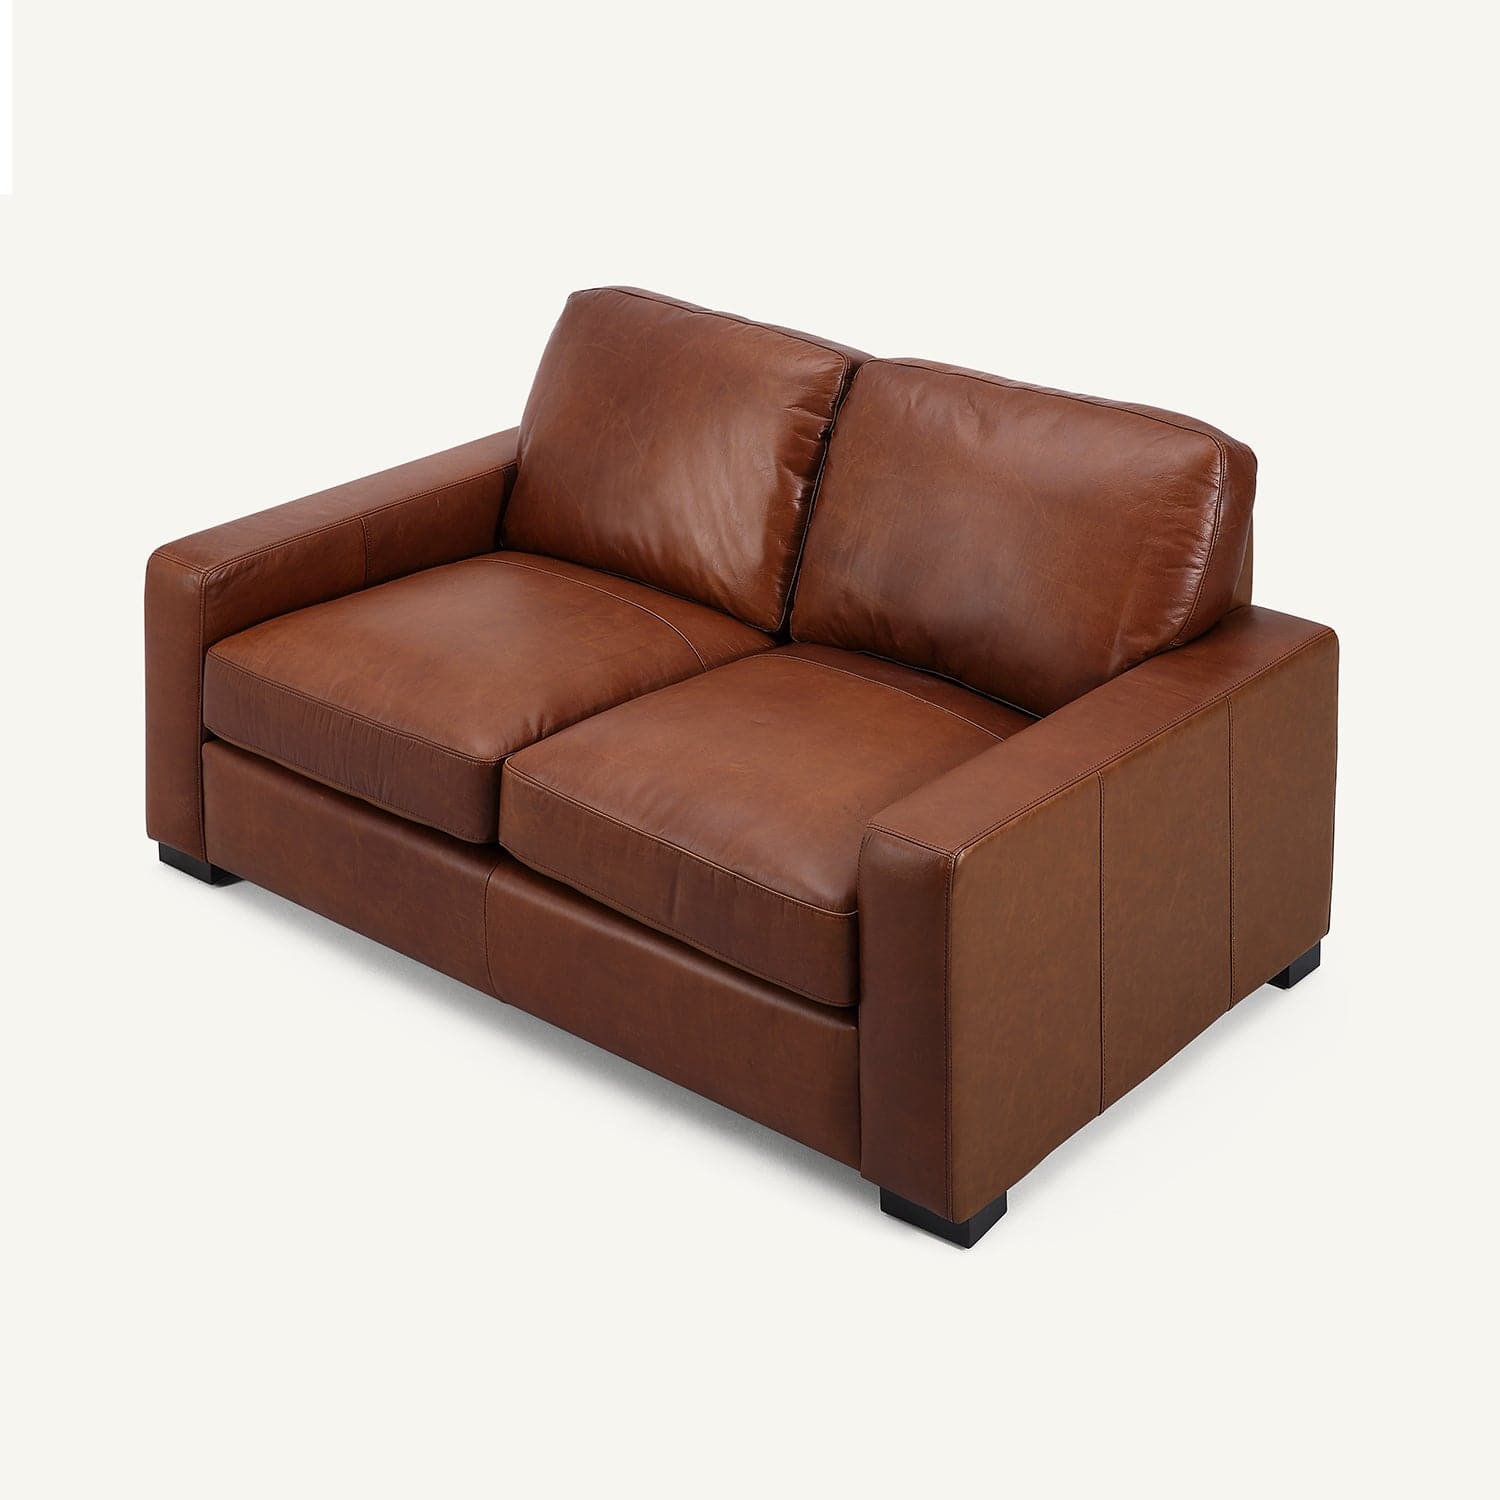 Randall Chestnut Brown Oil Wax Leather Loveseat with Ottoman